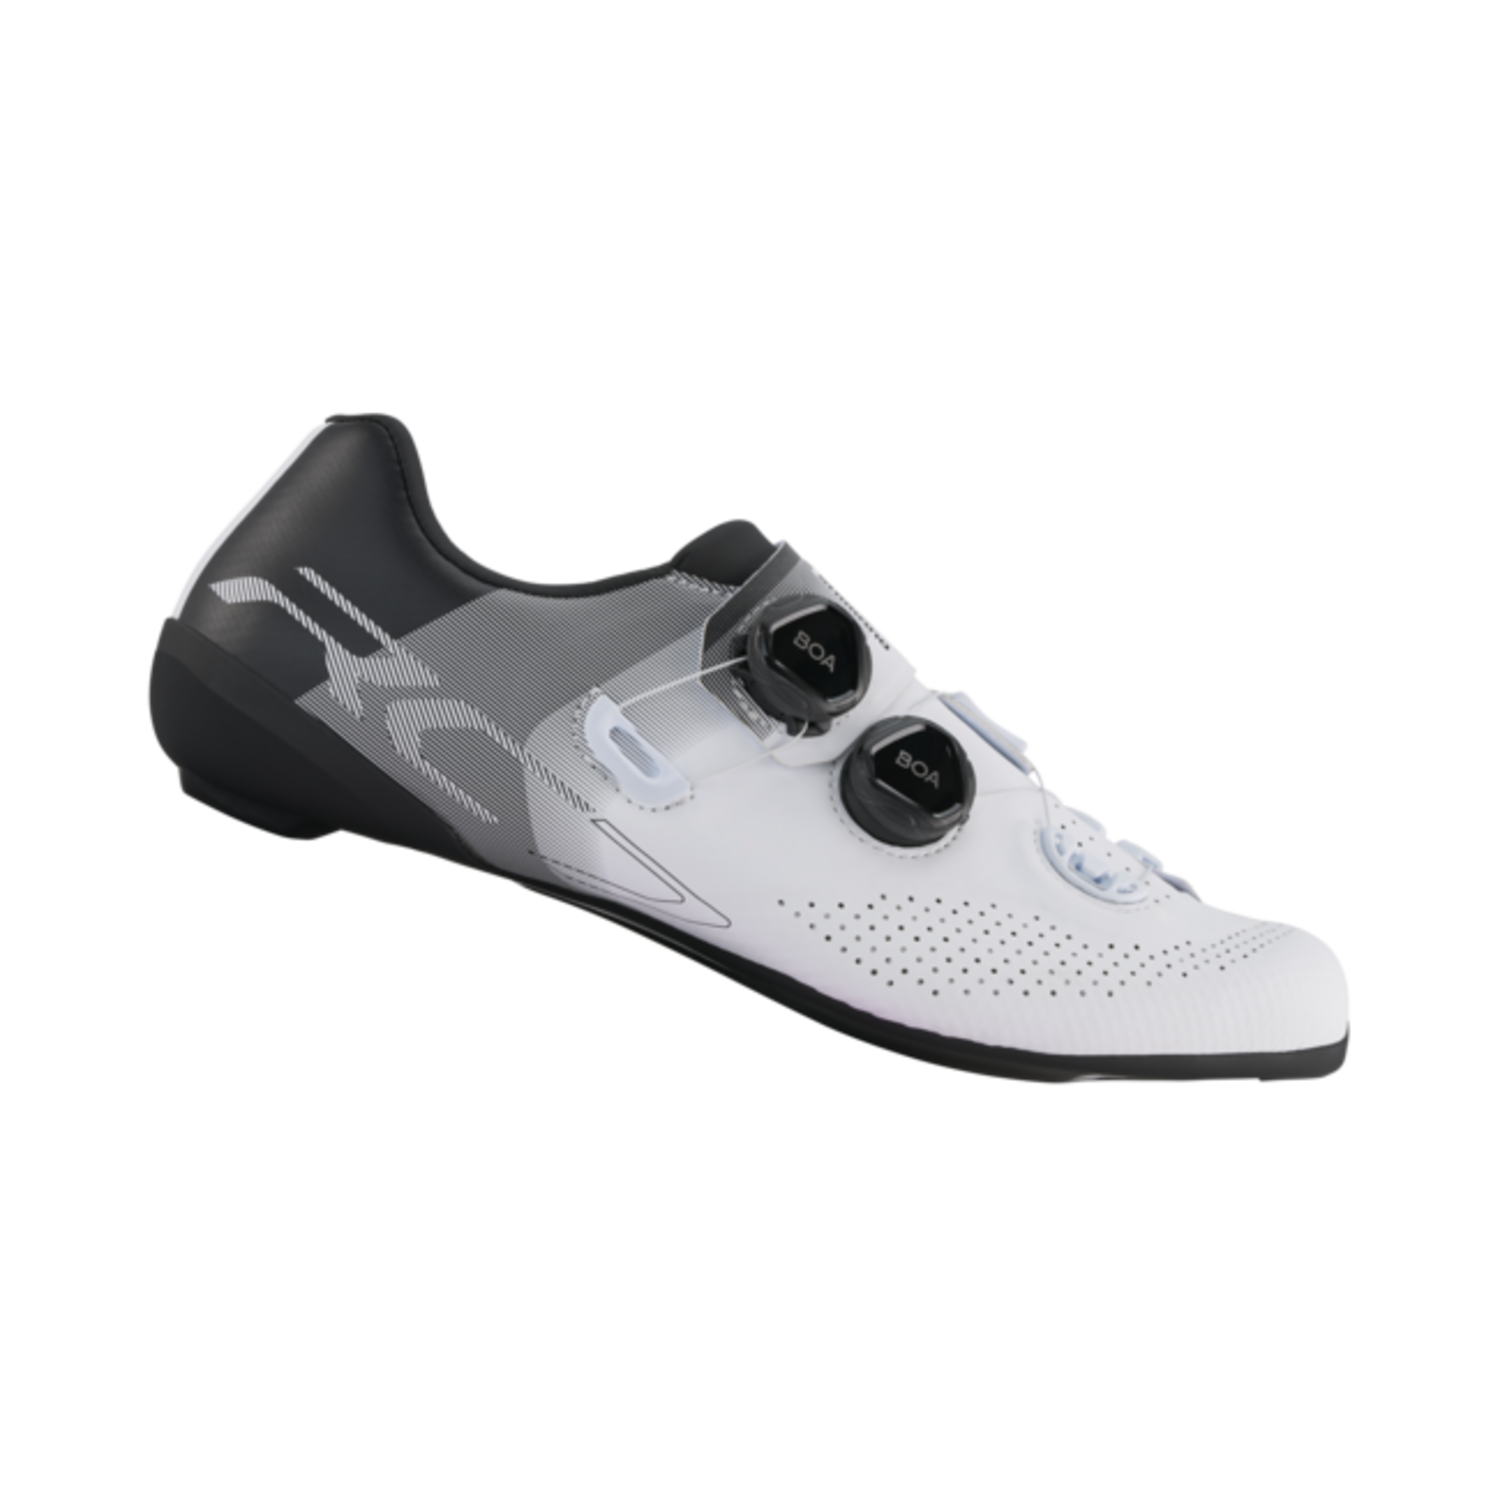 Shimano RC702 Road Shoes | Chain Reaction Bicycles - Chain